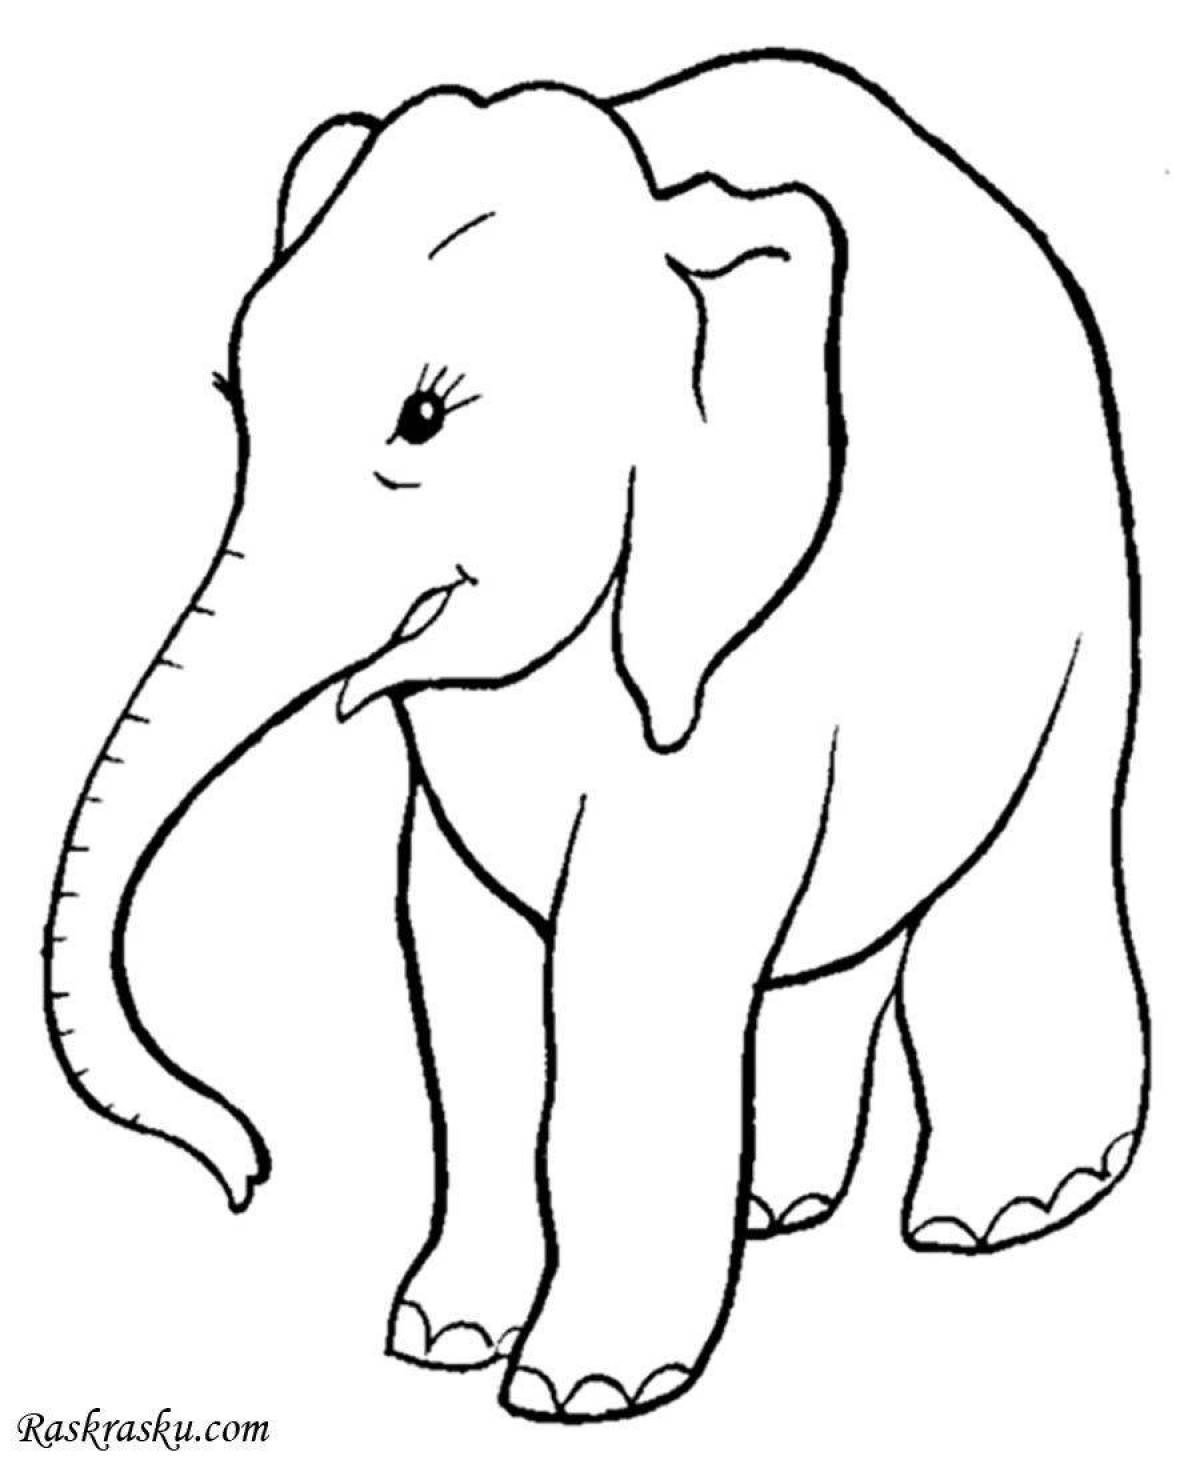 Bright elephant coloring book